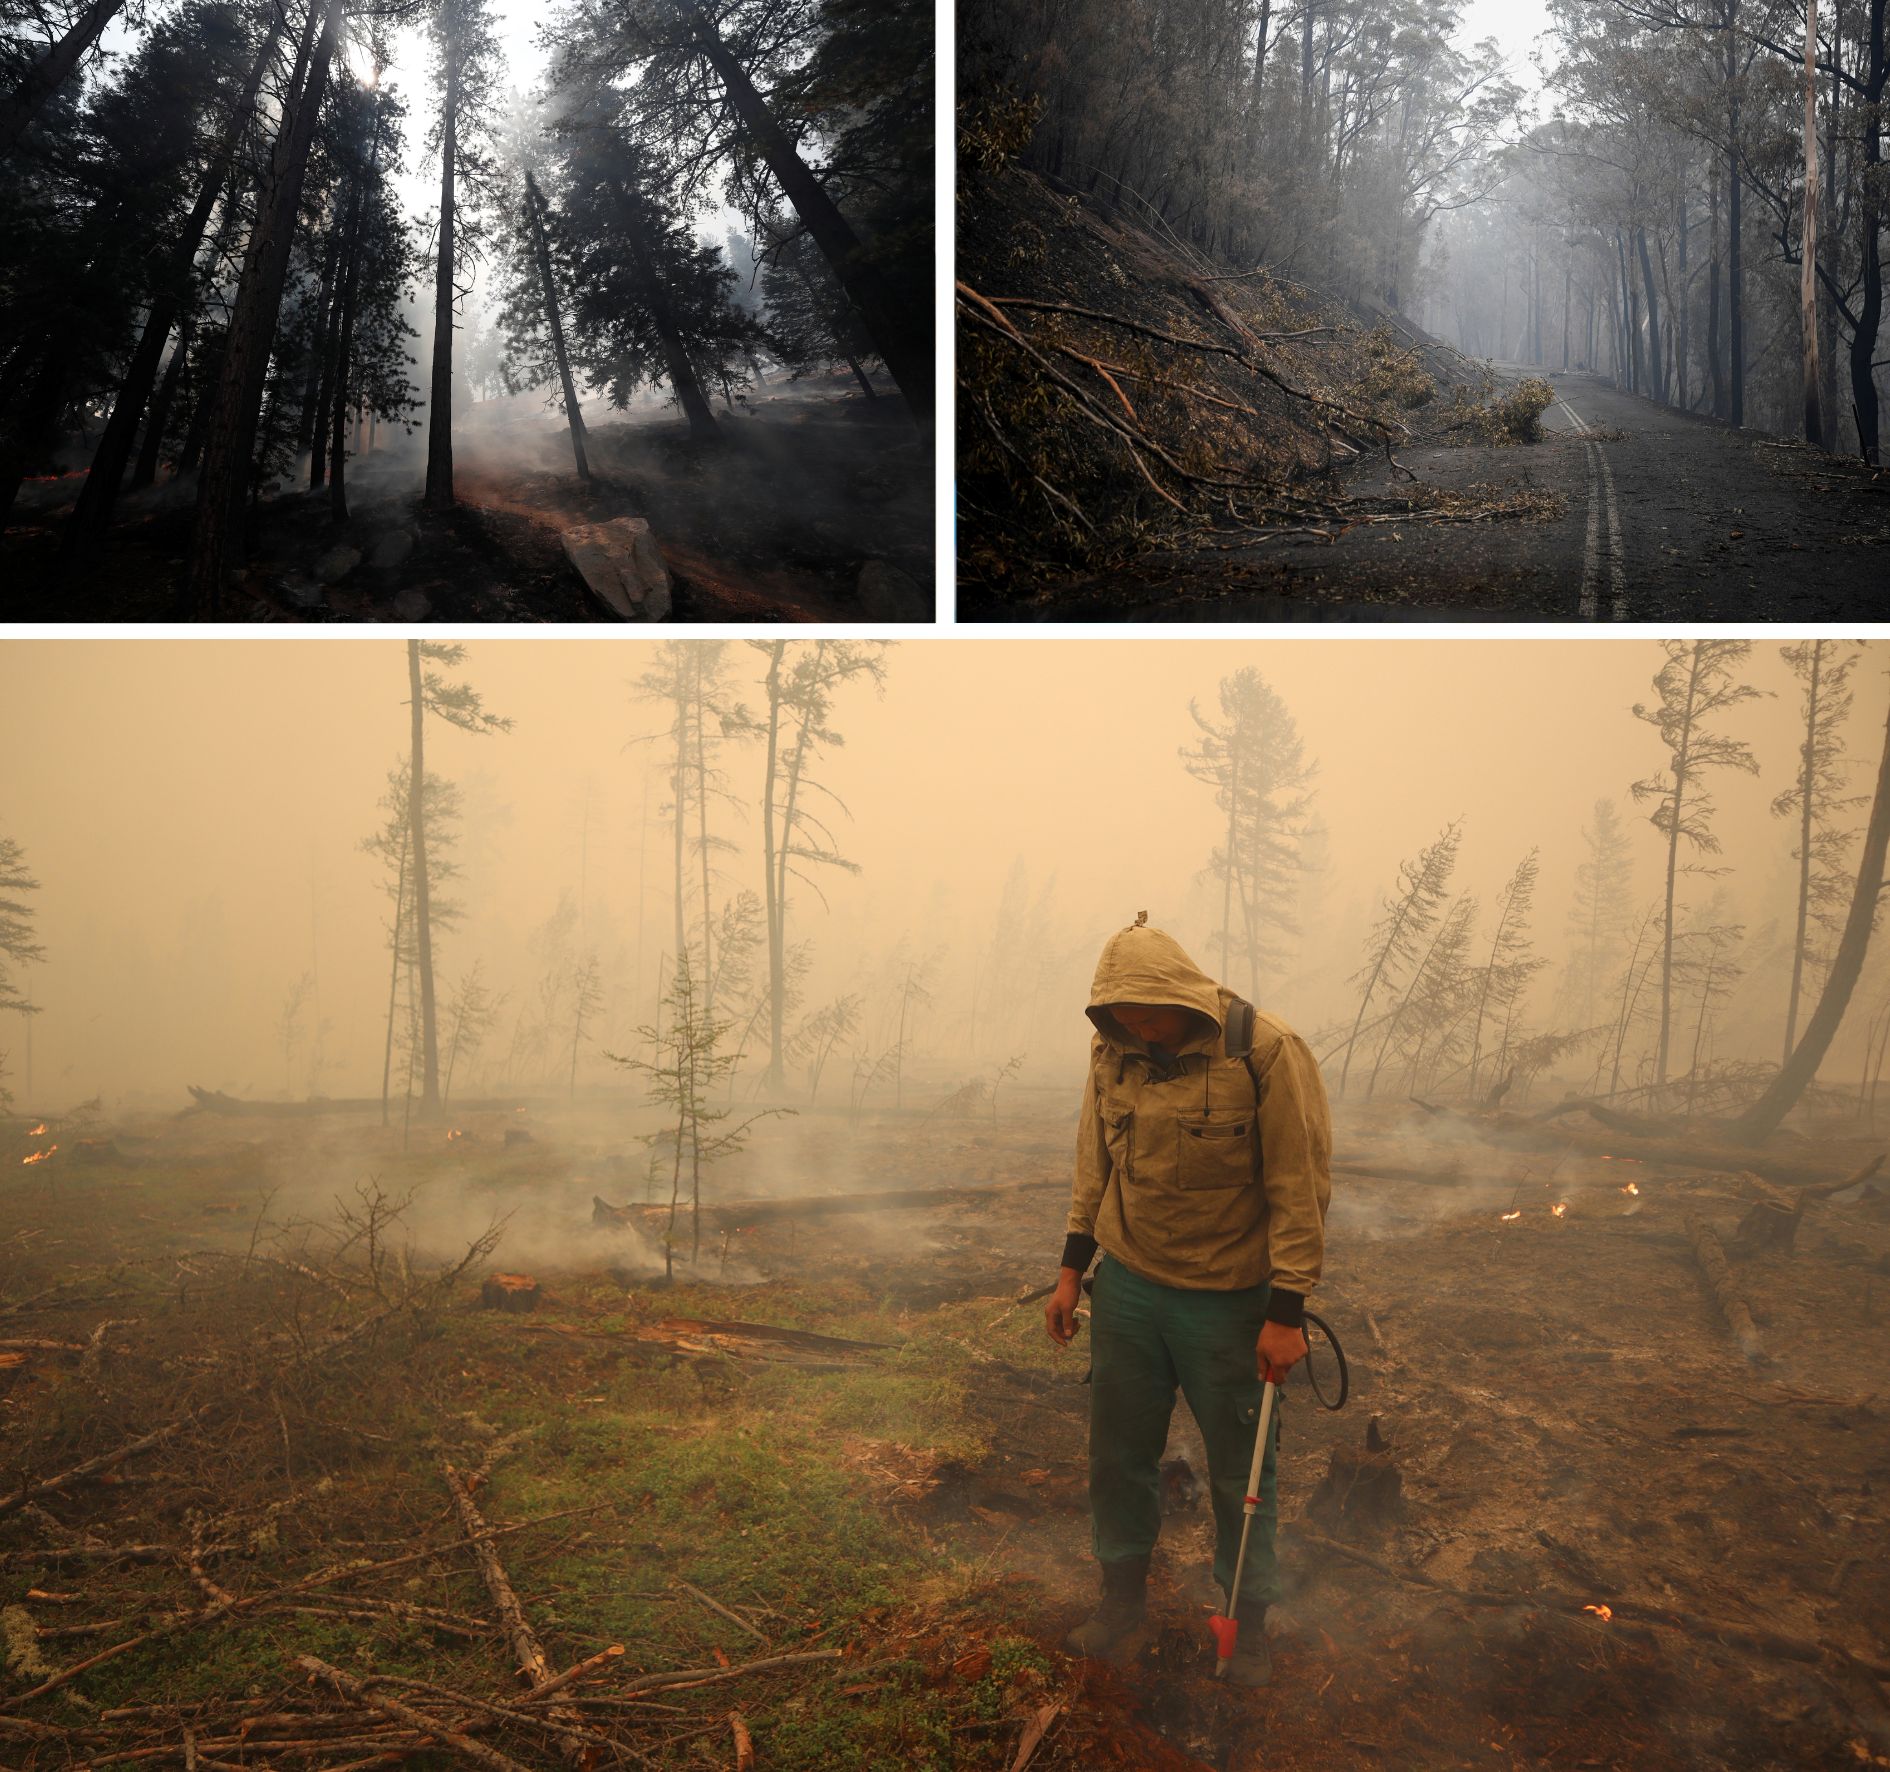 Three photos showing burnt landscape in California, Australia and Siberia during each of their megafires